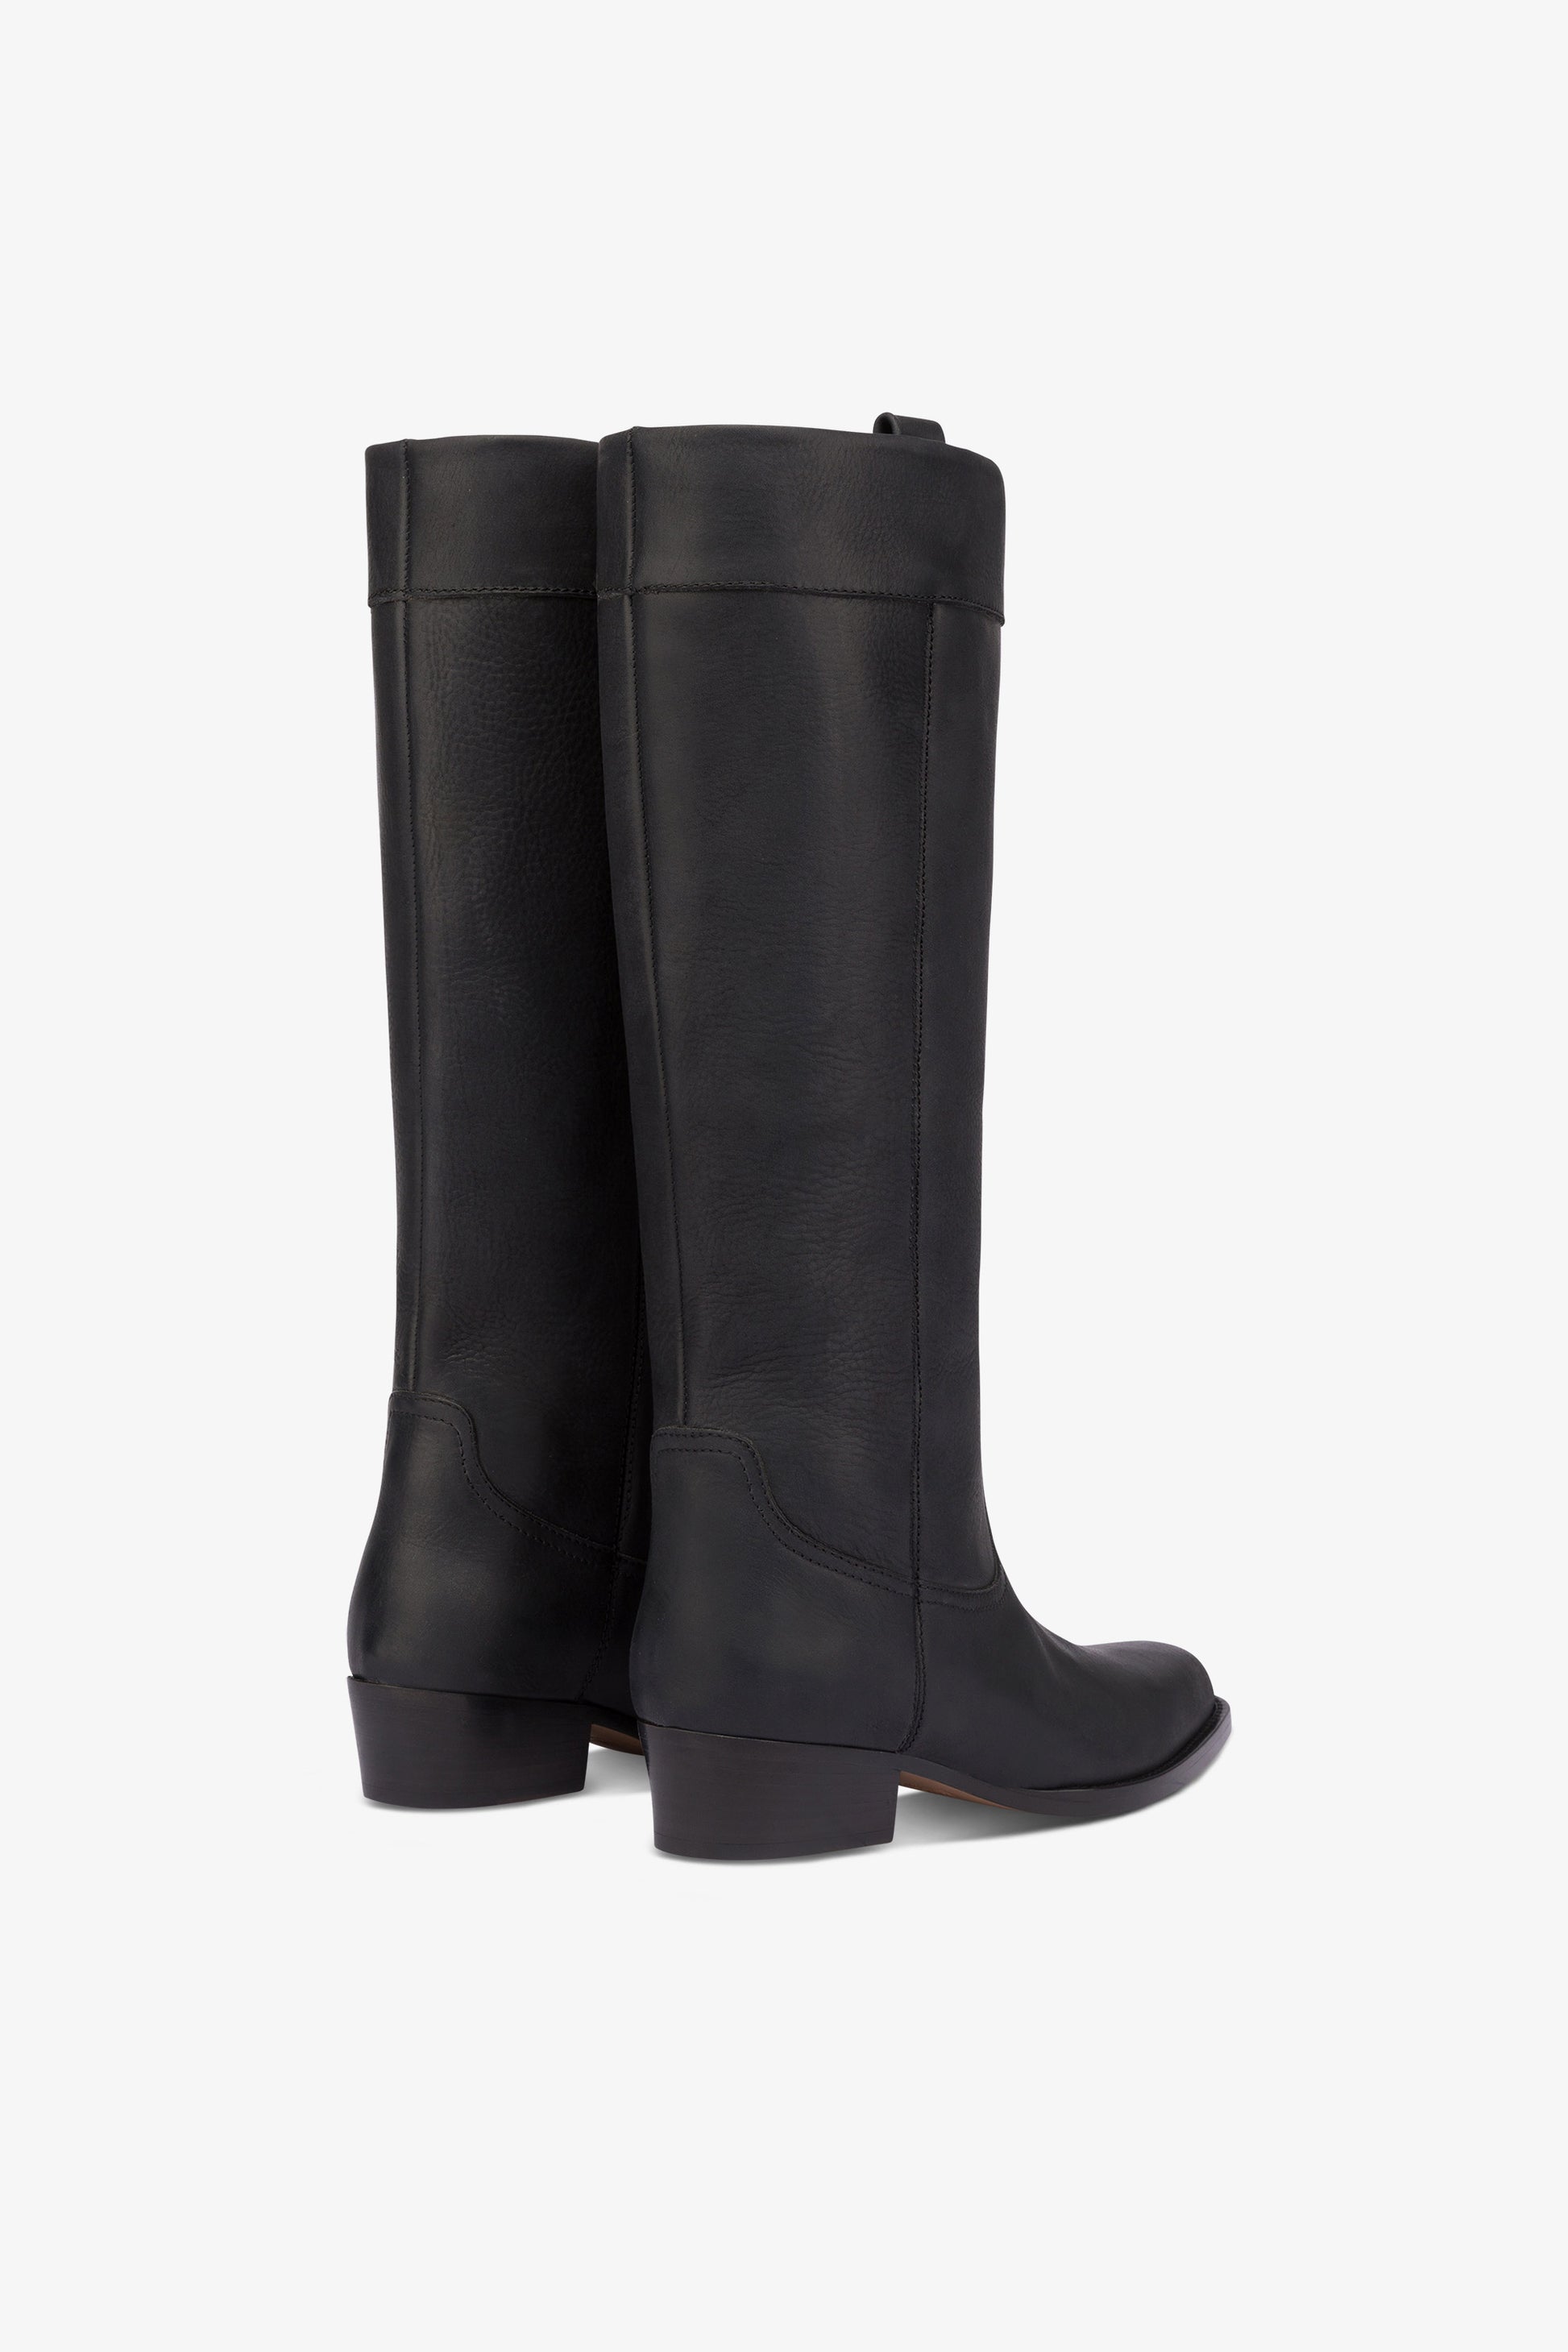 Calf-length boots in soft black pebble leather